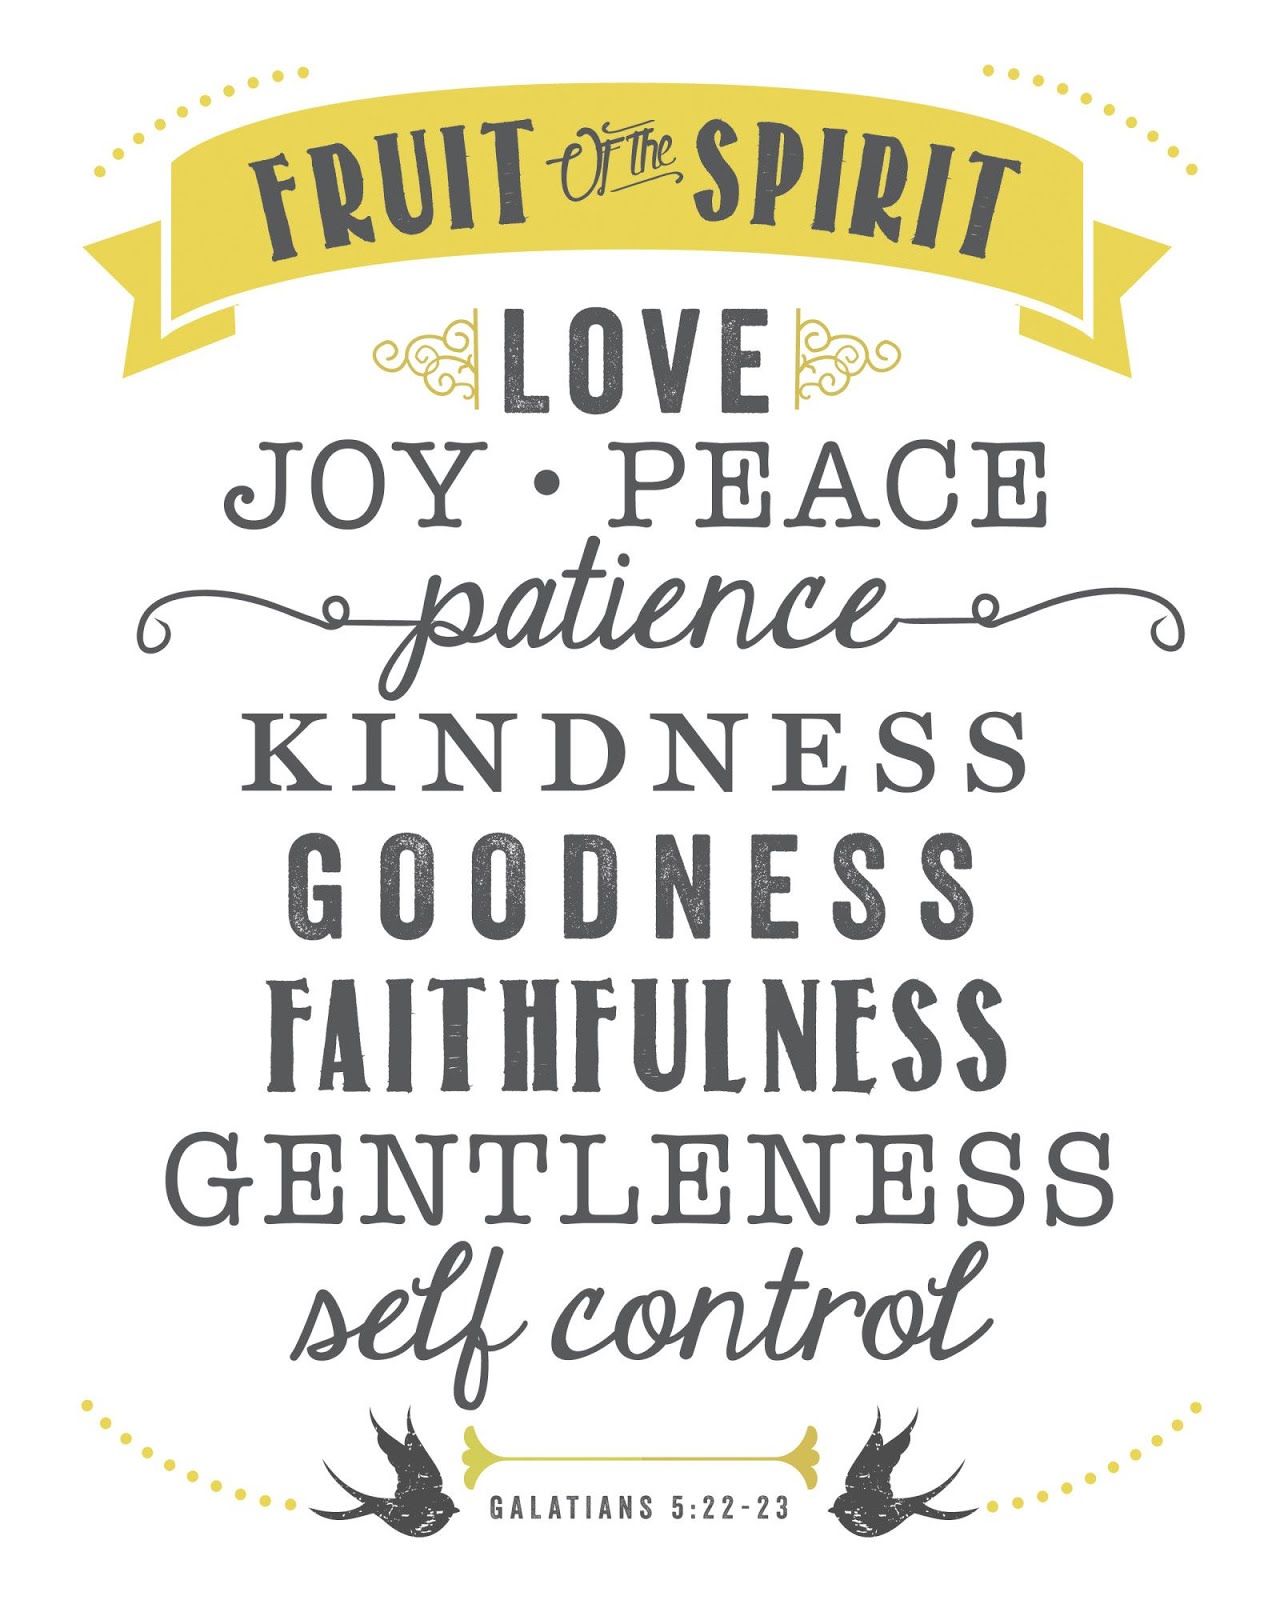 The Fruits of the Holy Spirit